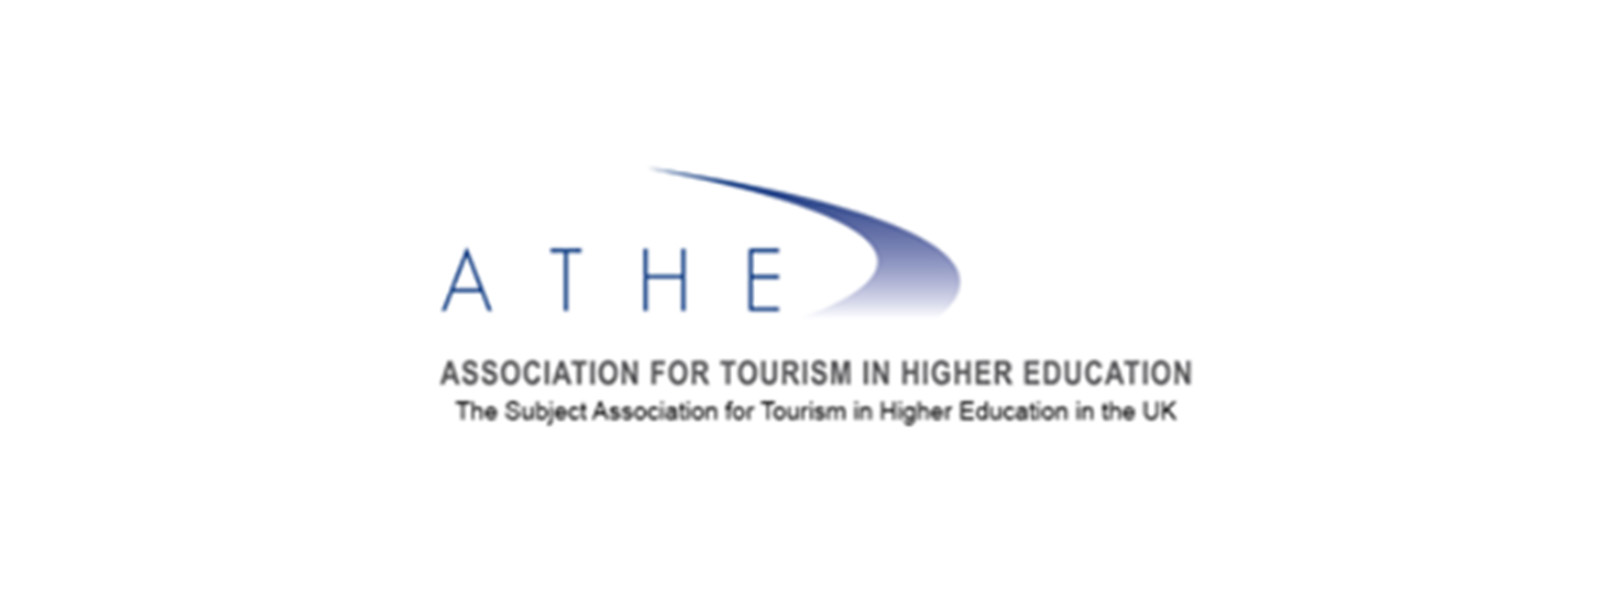 Blue letters spelling ATHE with association for tourism in higher education written underneath